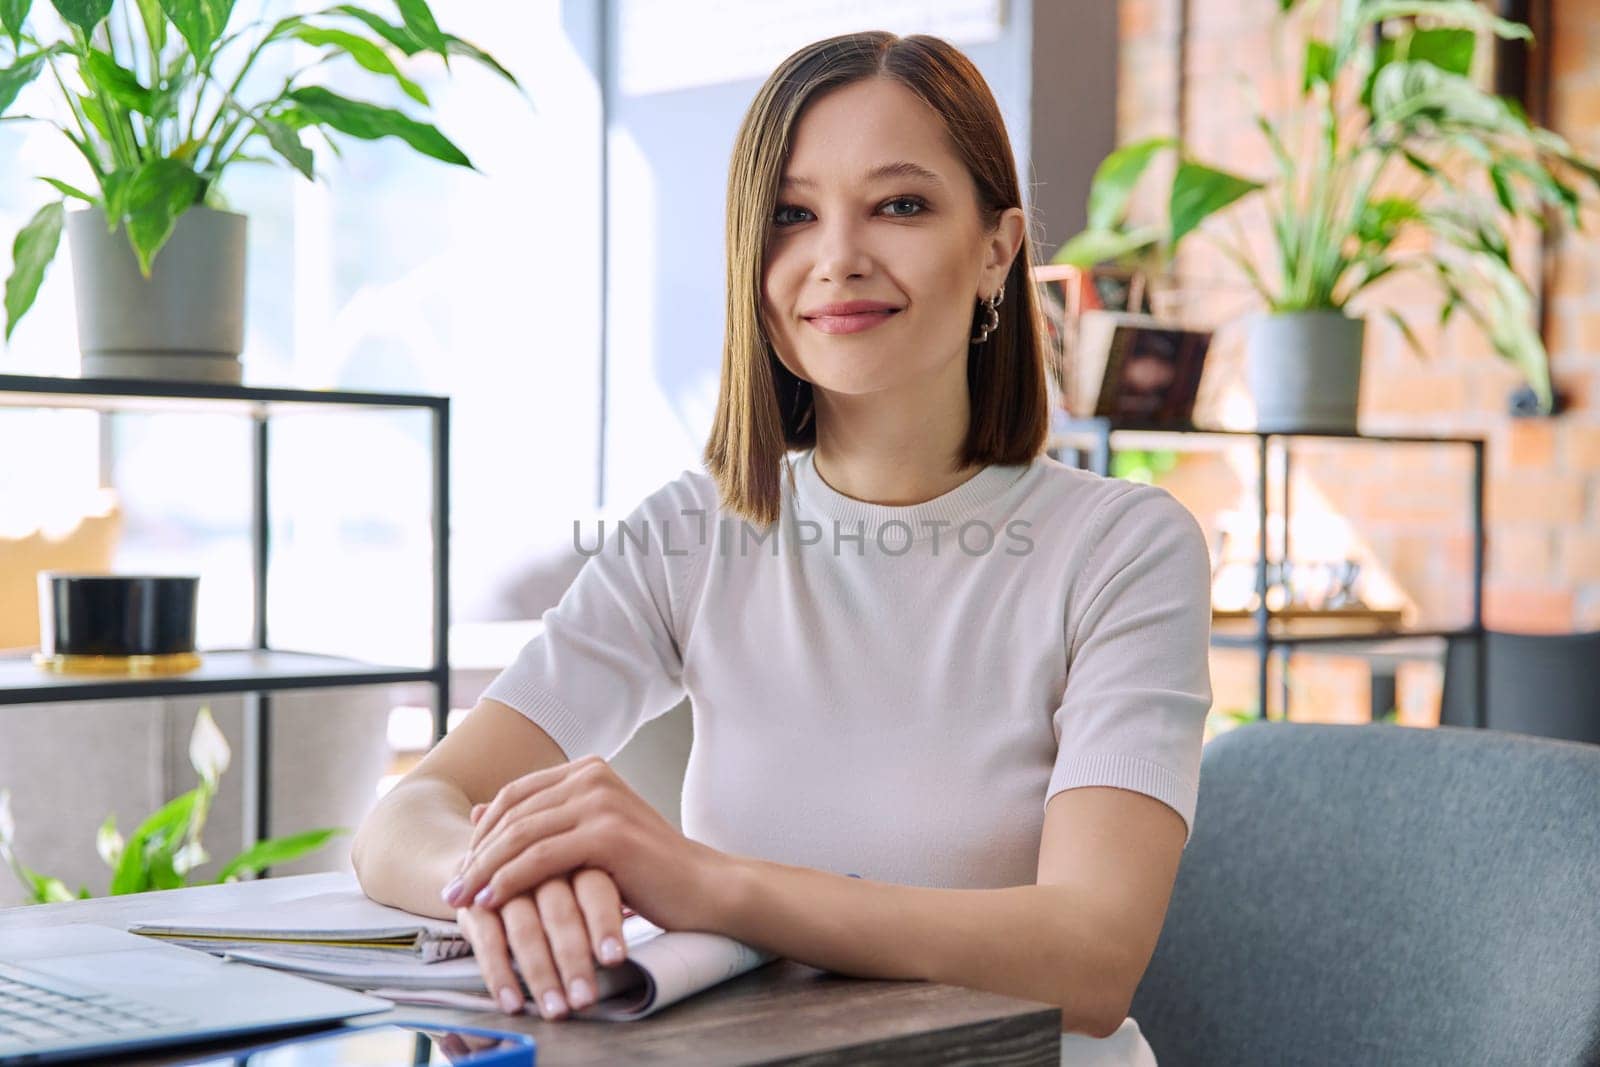 Portrait of beautiful smiling young woman sitting at table in coworking cafe, stylish pretty female 20s student looking at camera. Youth, beauty, university college students, lifestyle concept